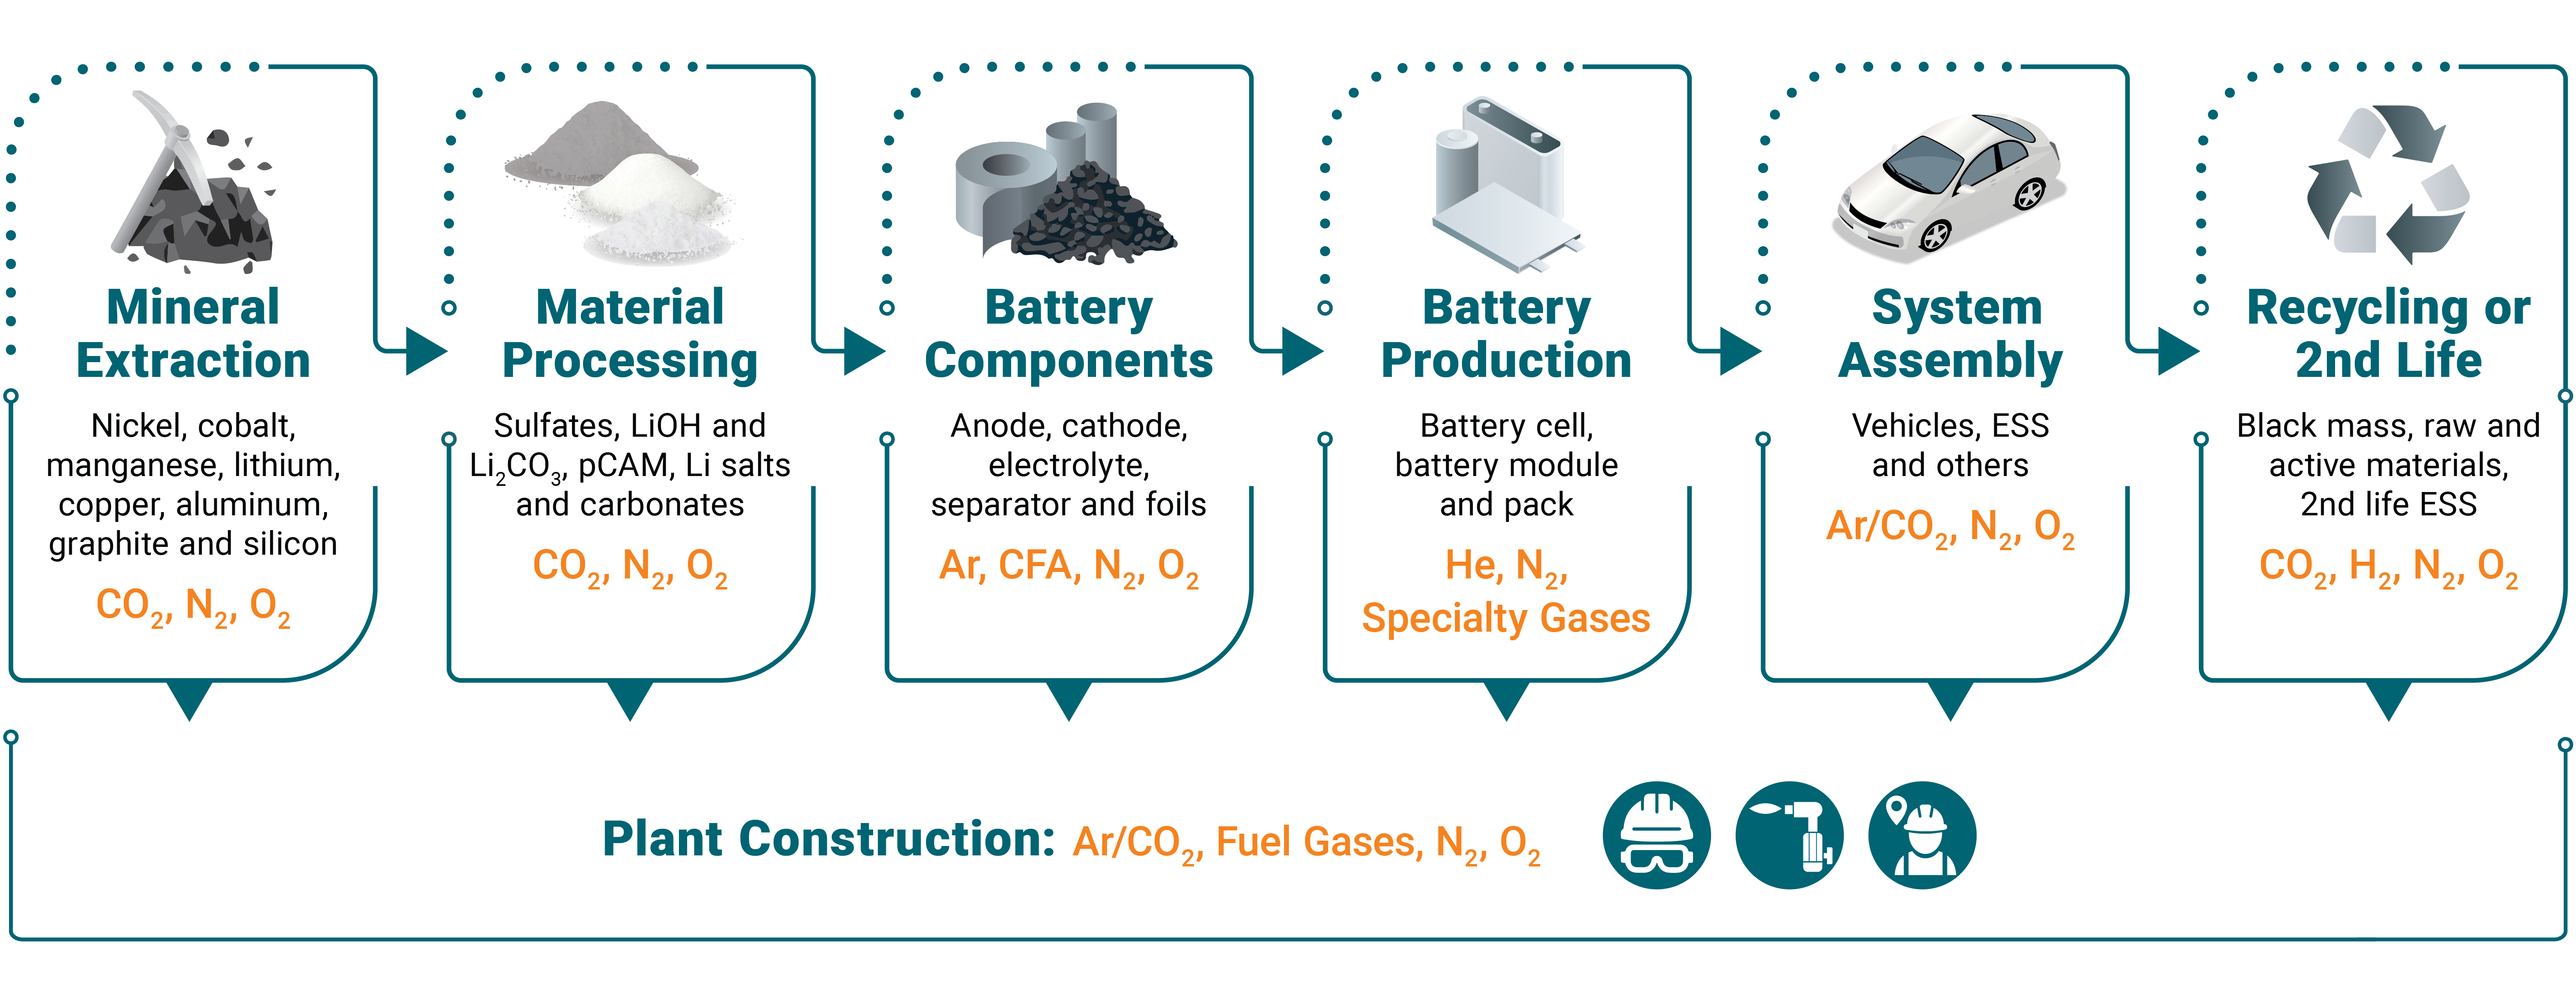 An inforgraphic showing the lifecycle of a battery